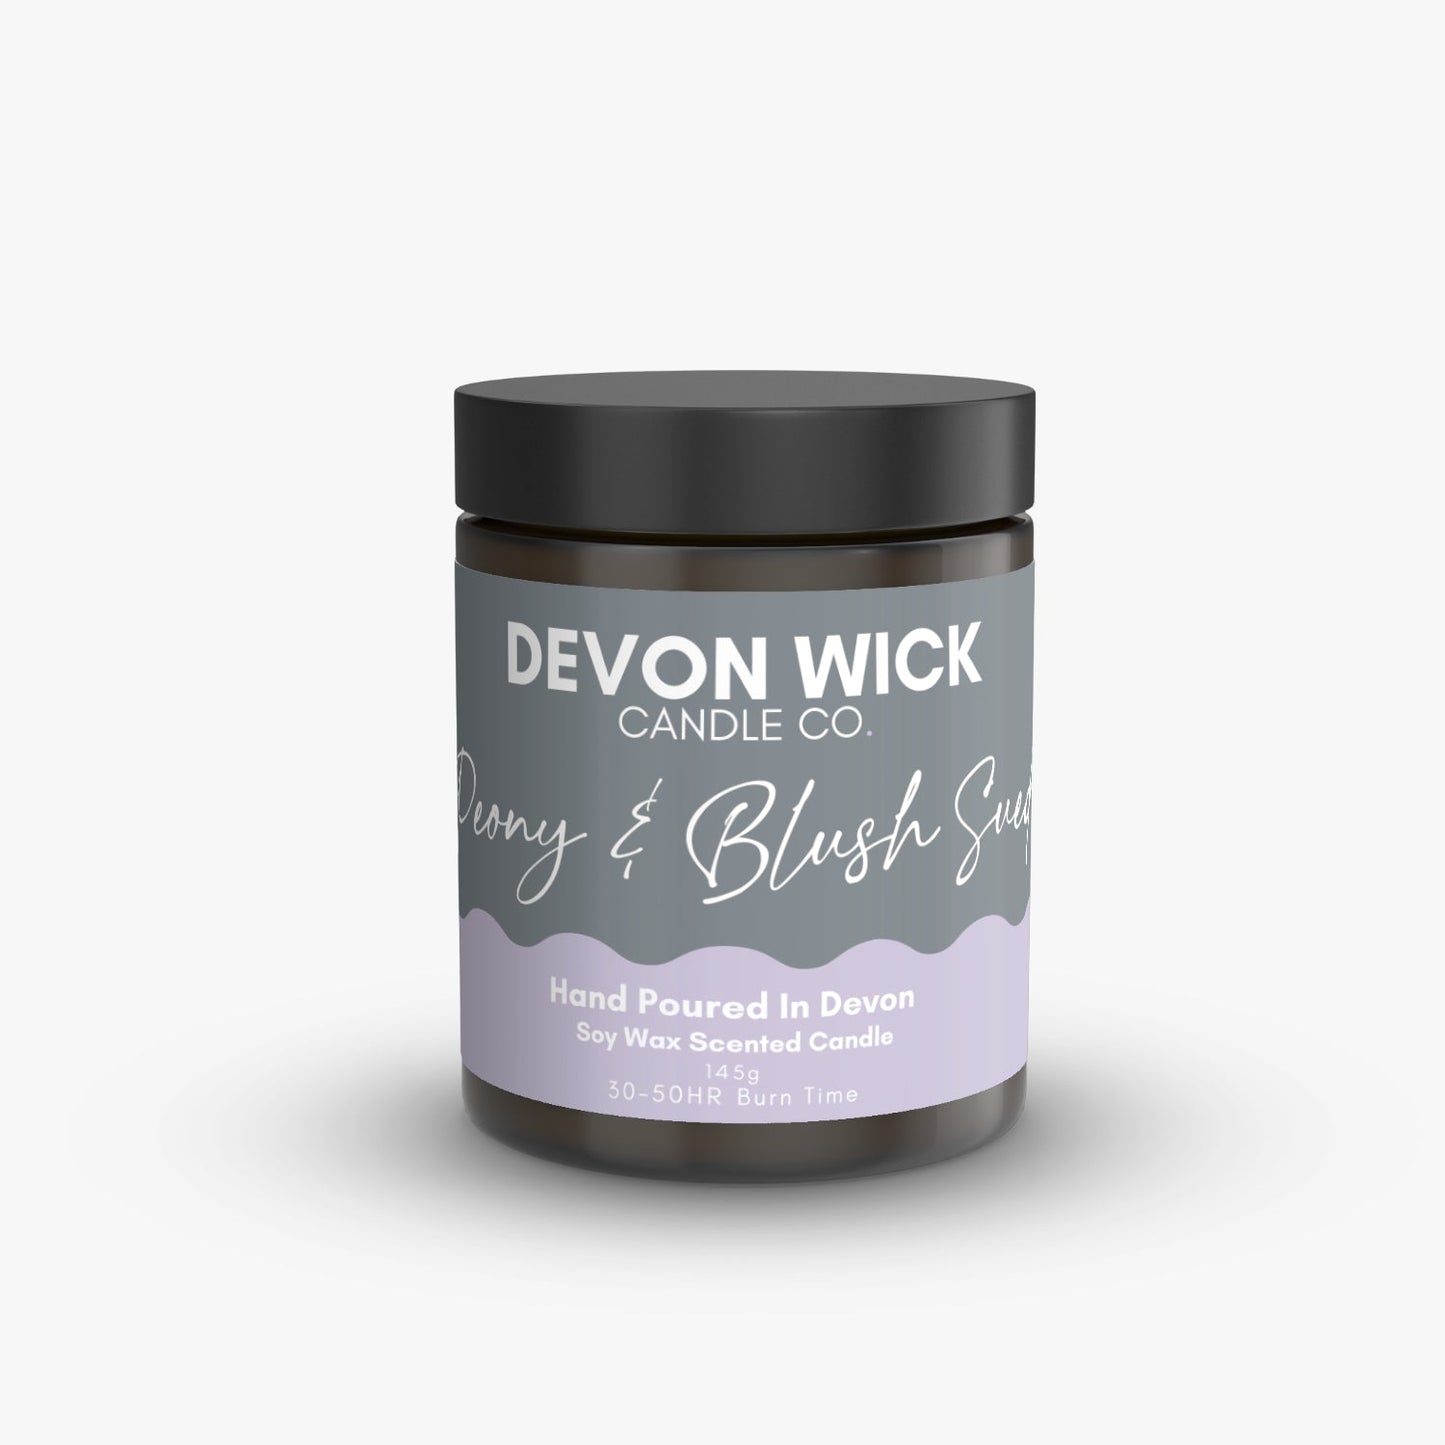 Devon Wick Candle Co. Limited Peony & Blush Suede Soy Wax Candle